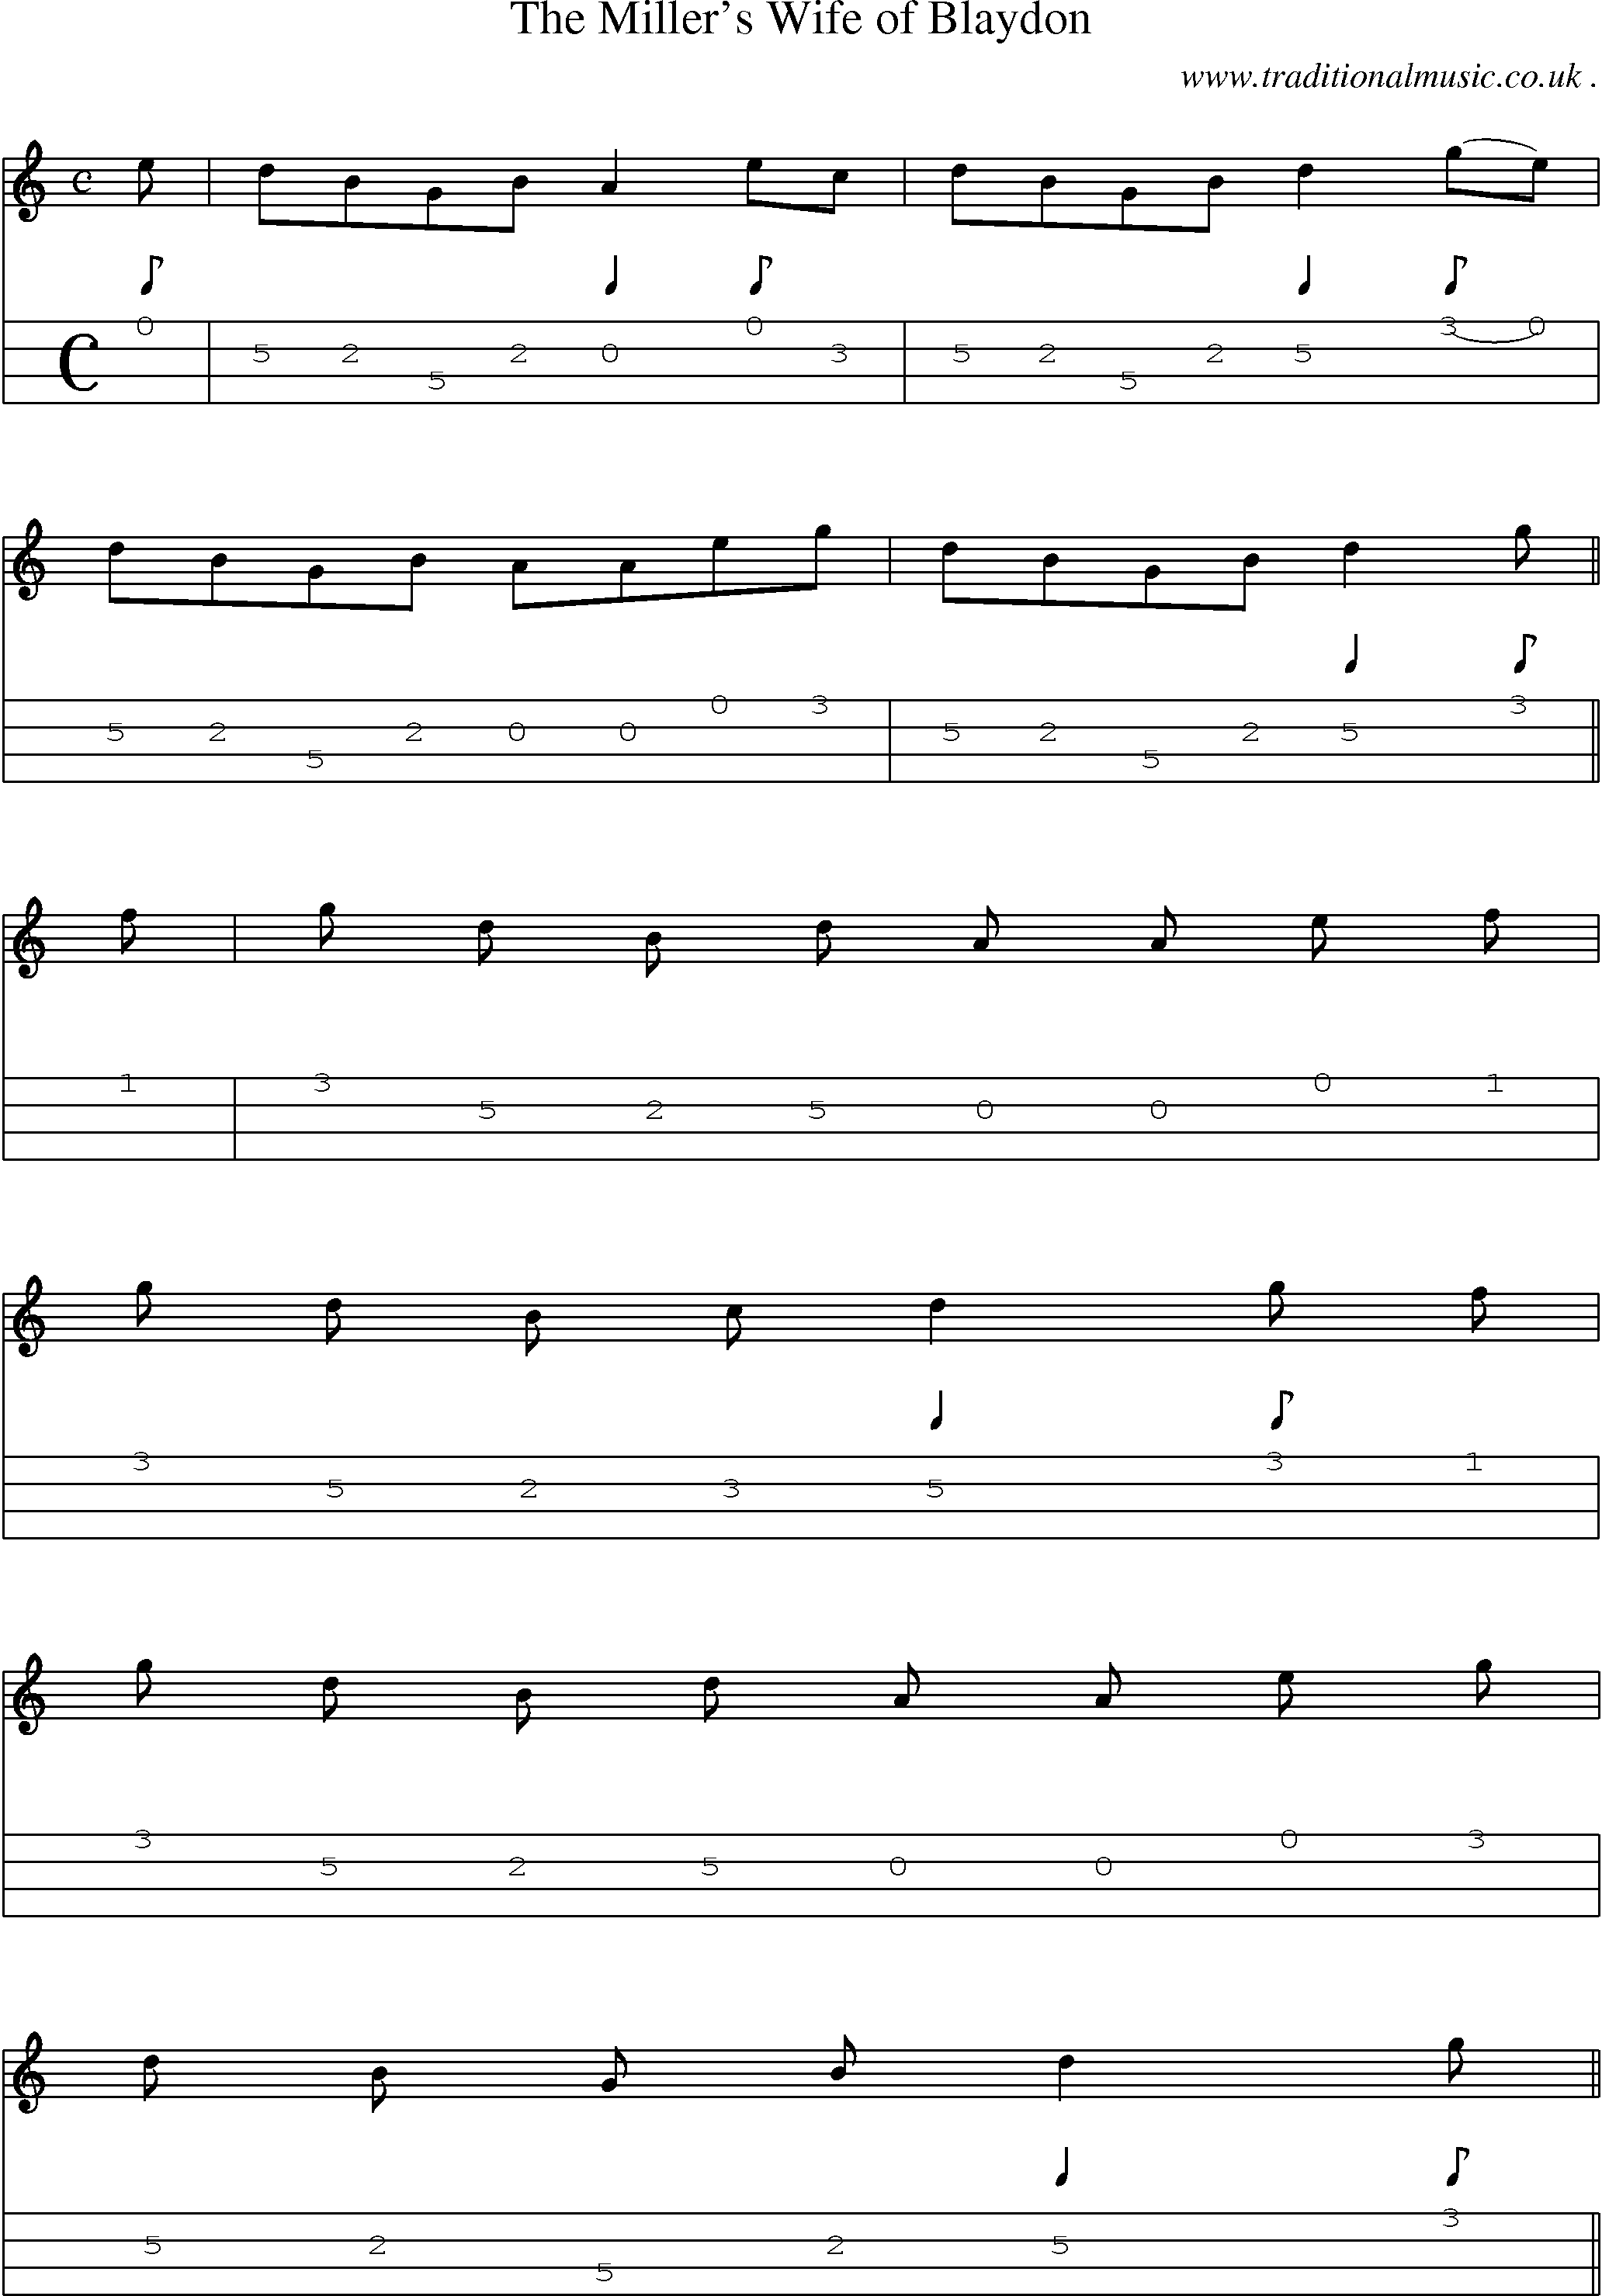 Sheet-Music and Mandolin Tabs for The Millers Wife Of Blaydon